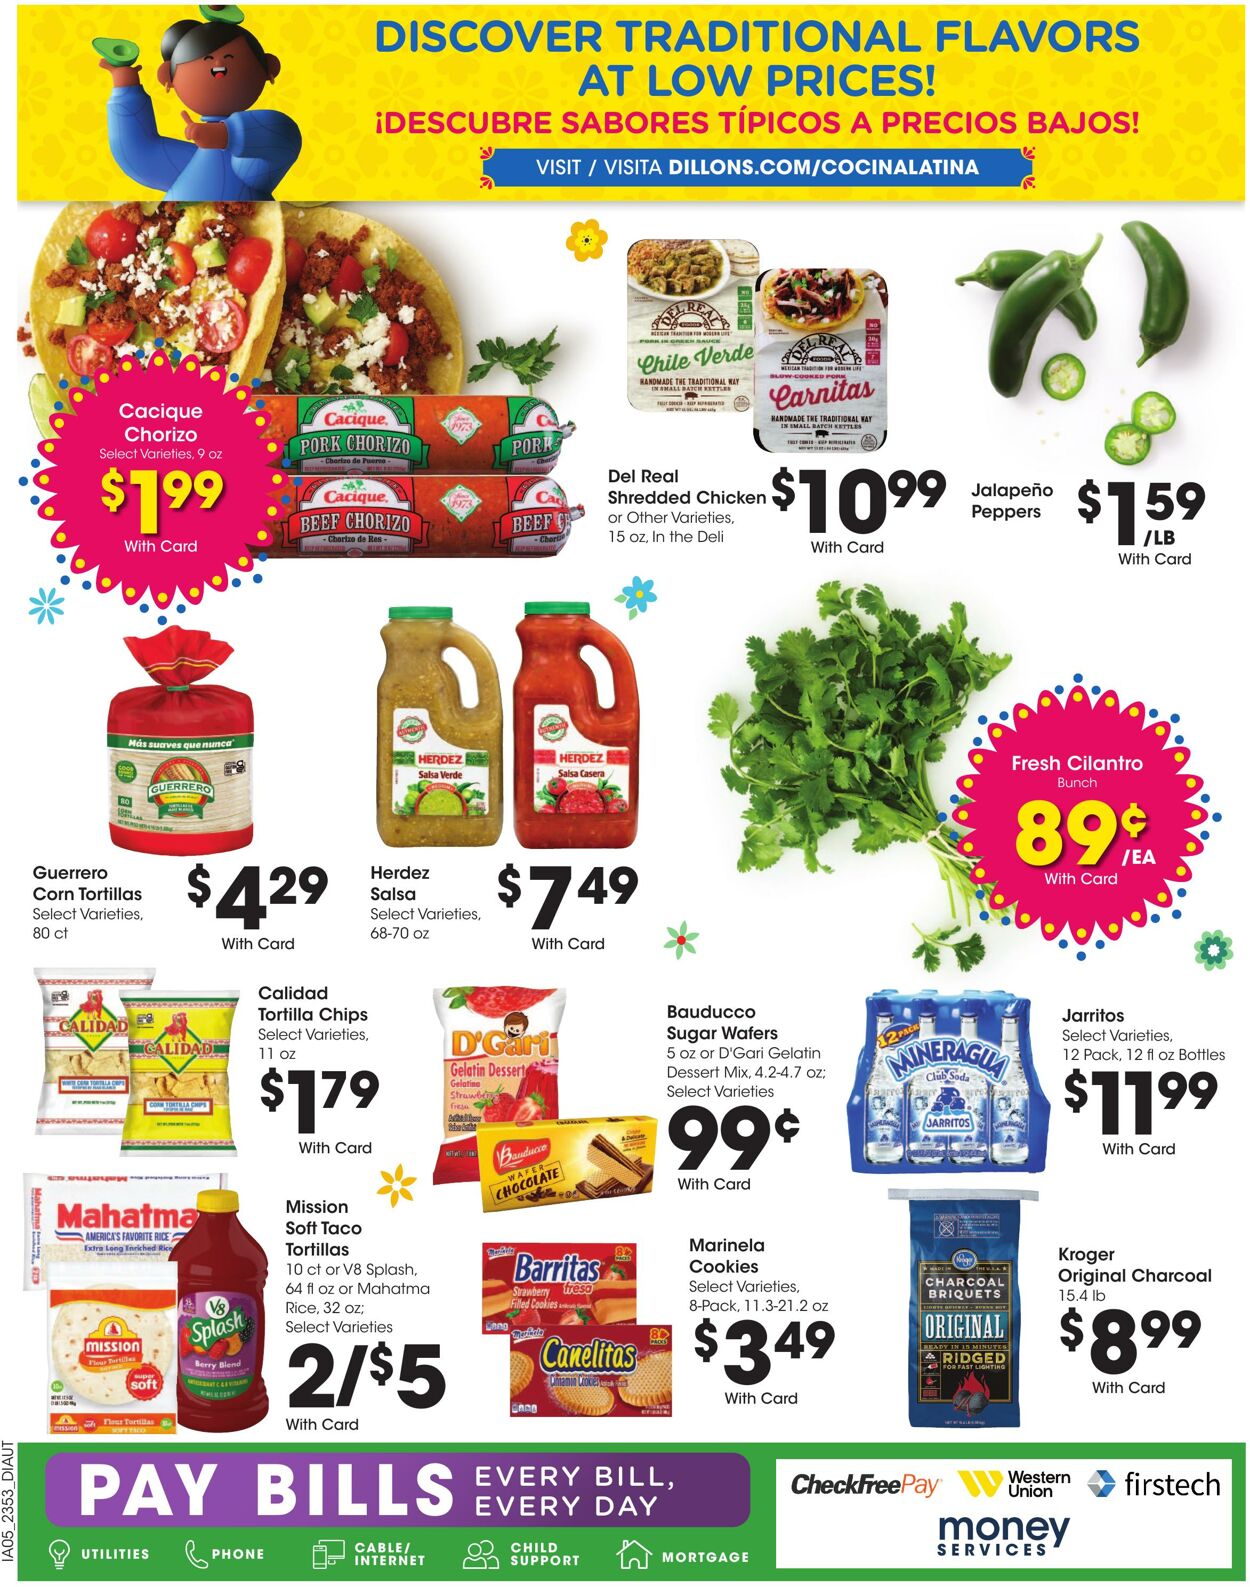 Weekly ad Dillons 01/31/2024 - 02/06/2024